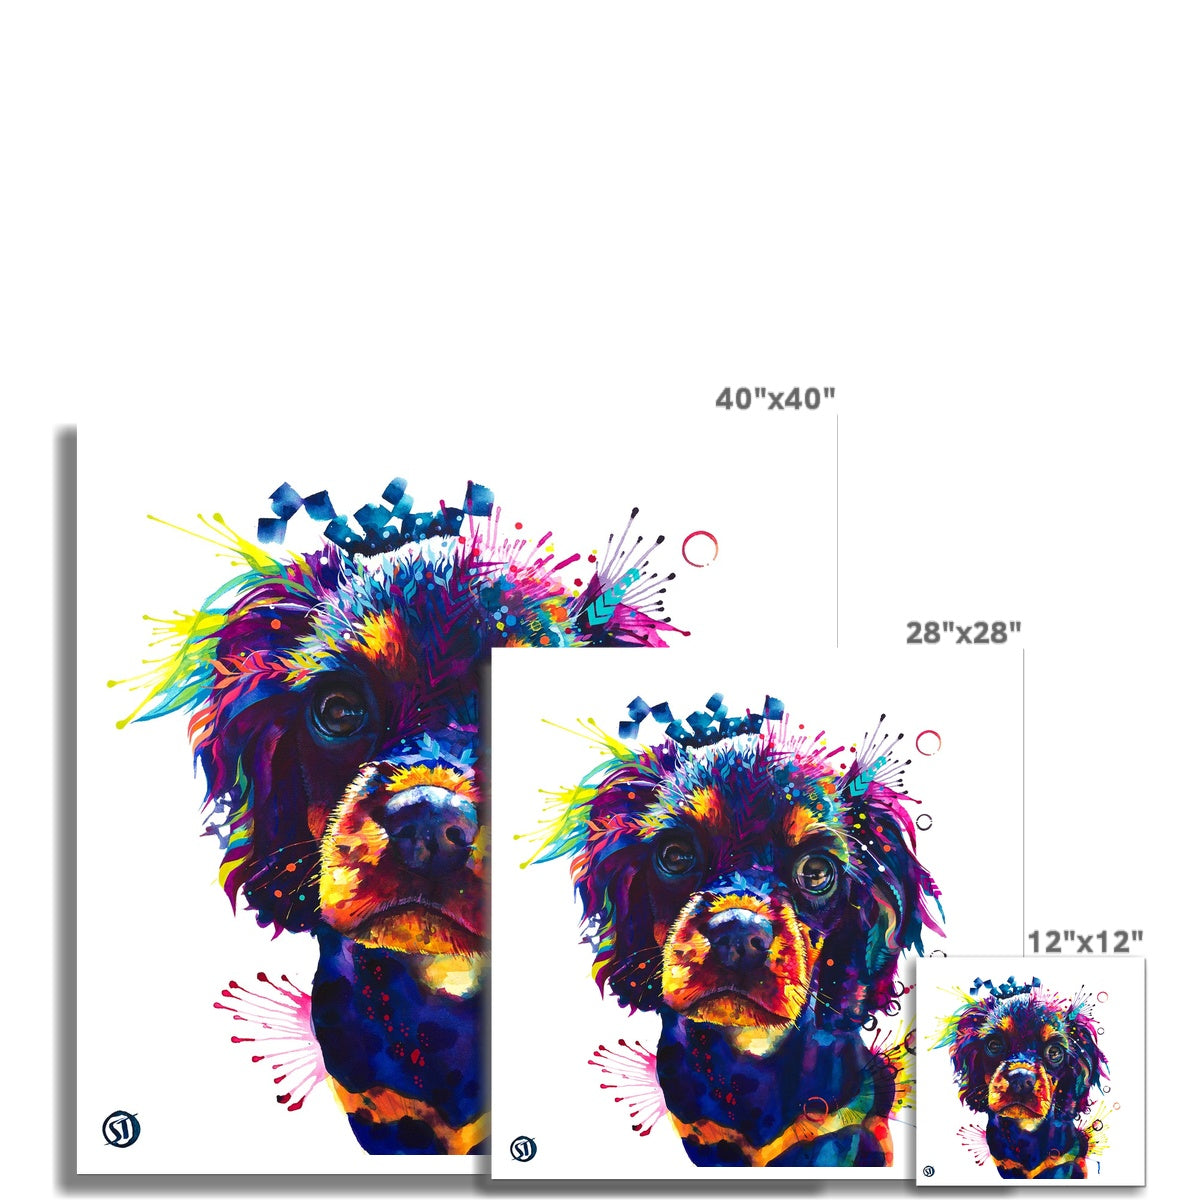 Cavalier King Charles Prints | Colourful Art Prints | Commission A Painting | Dog Drawings